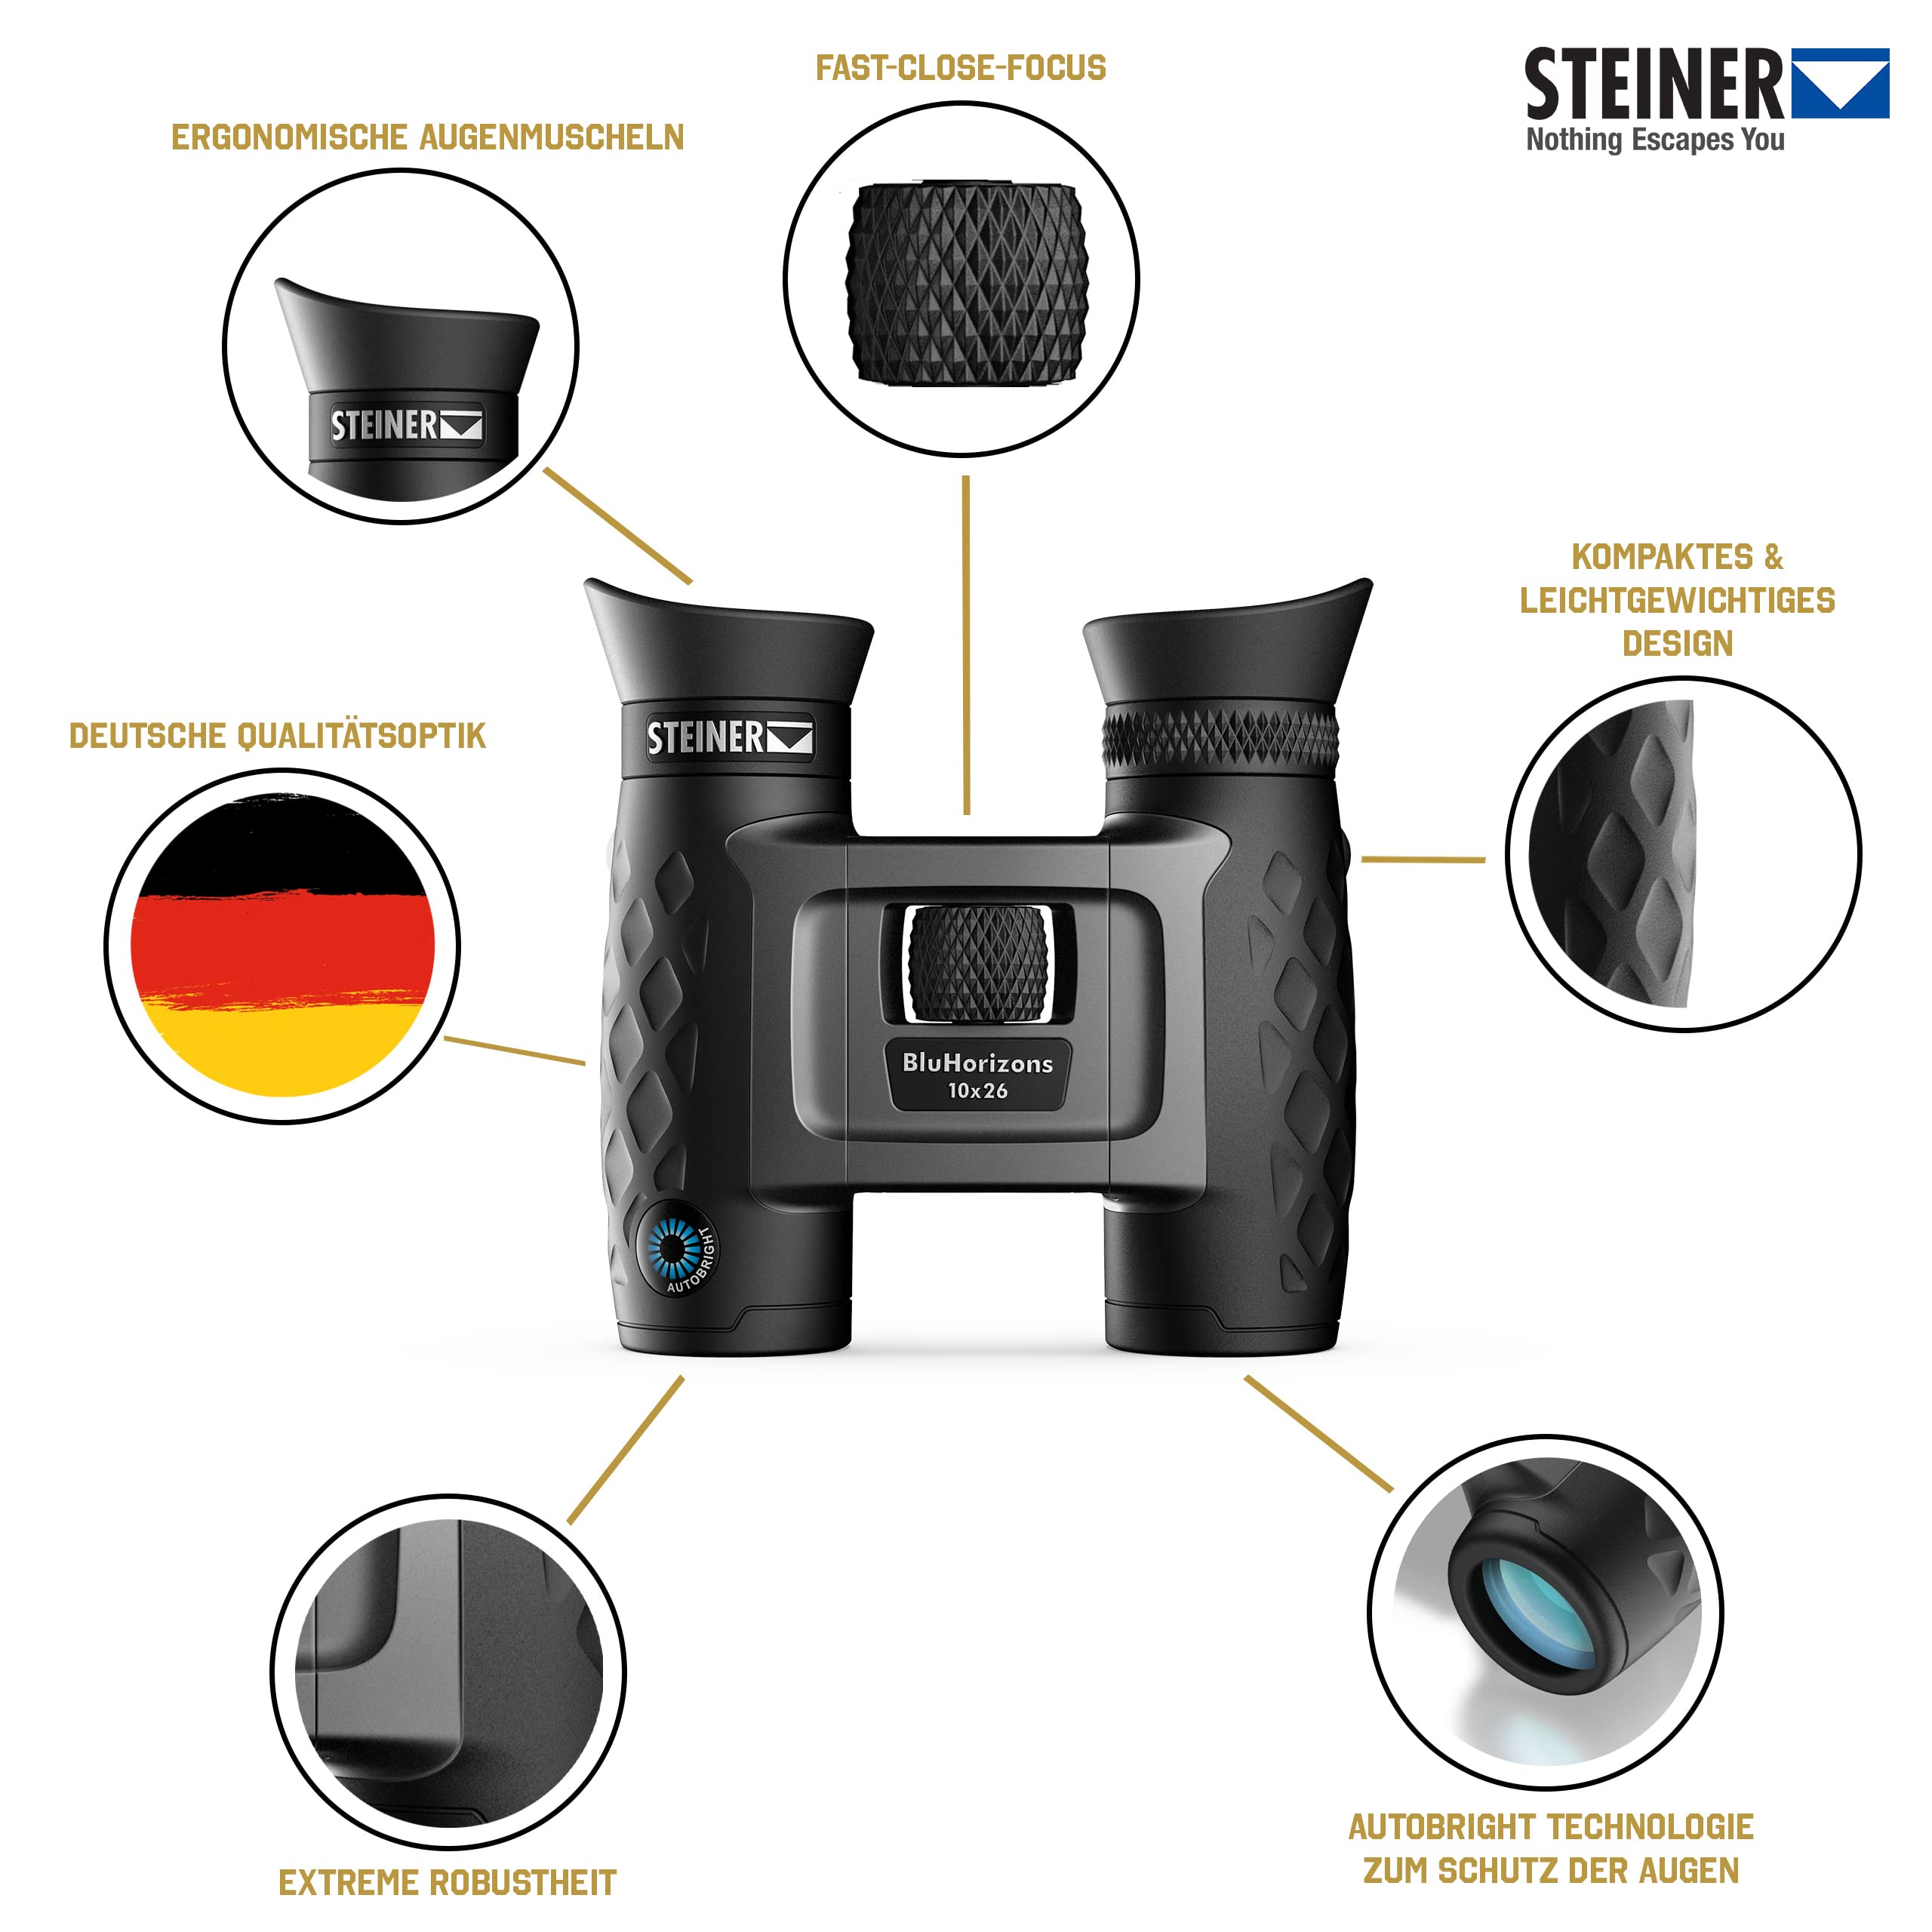 Steiner BluHorizons Binoculars - Unique Lens Technology, Eye Protection, Compact, Lightweight - Ideal for Outdoor Activities and Sporting Events